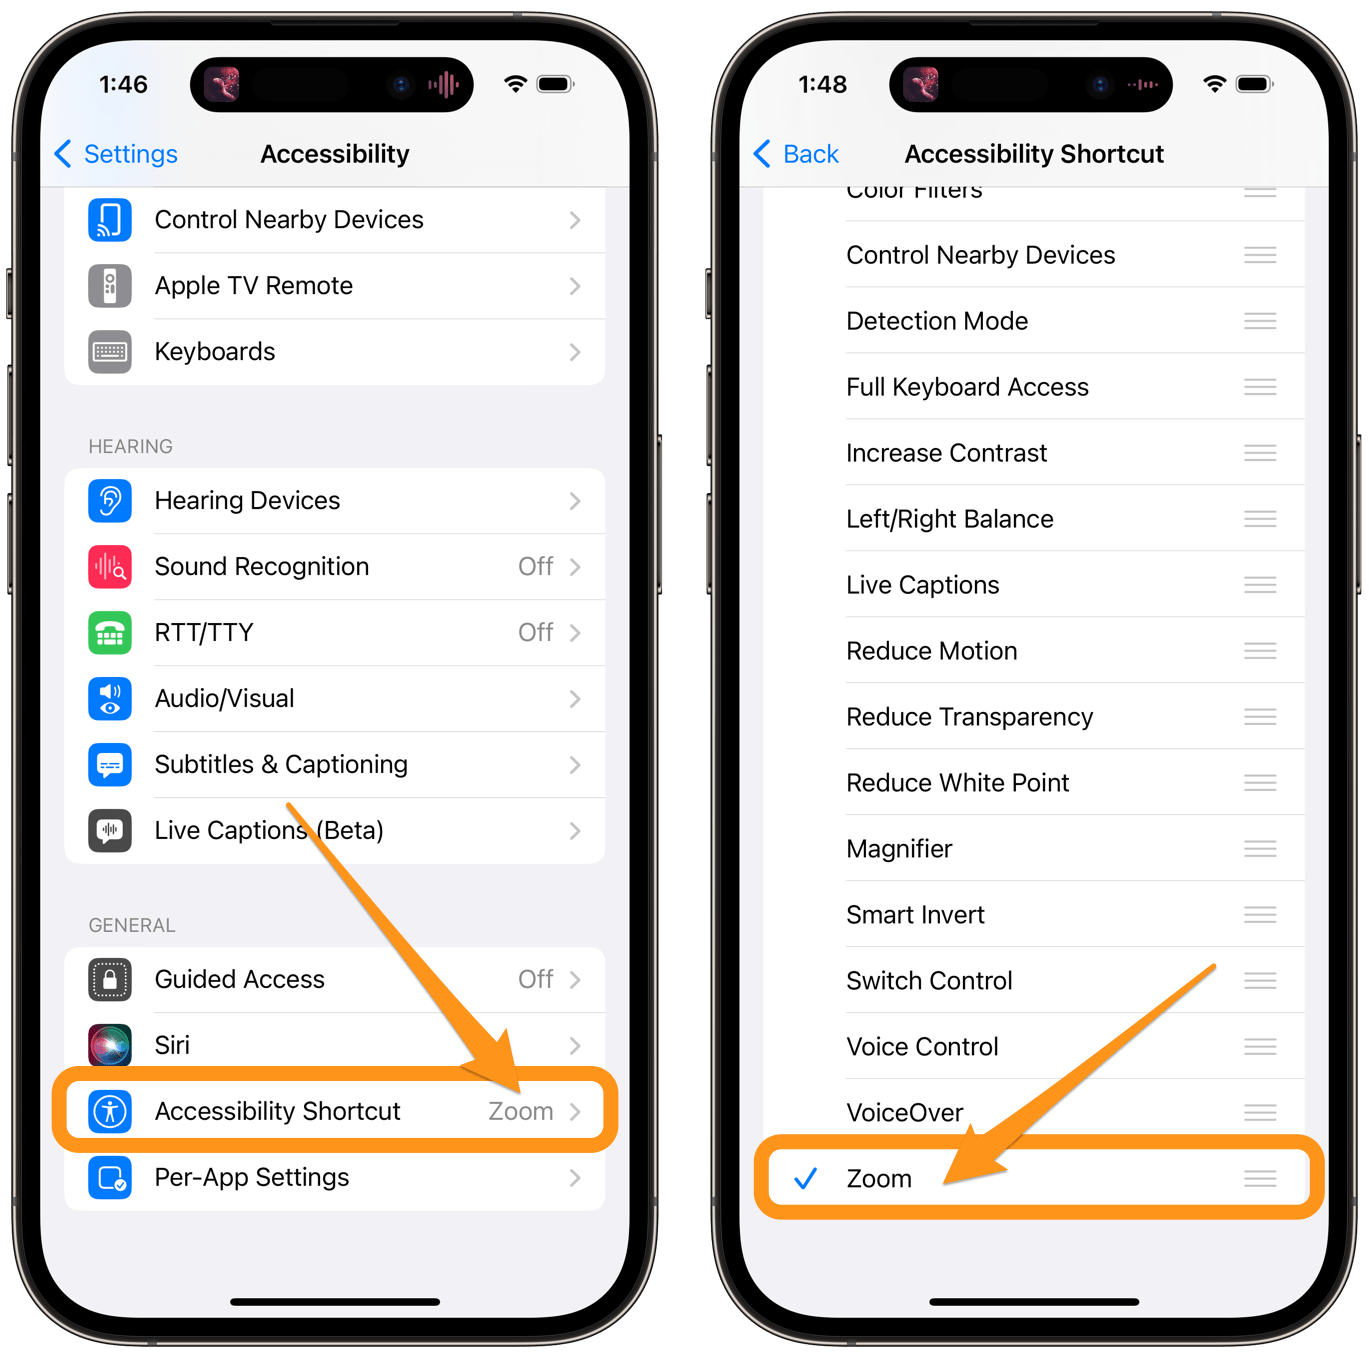 iPhone accessibility shortcut zoom